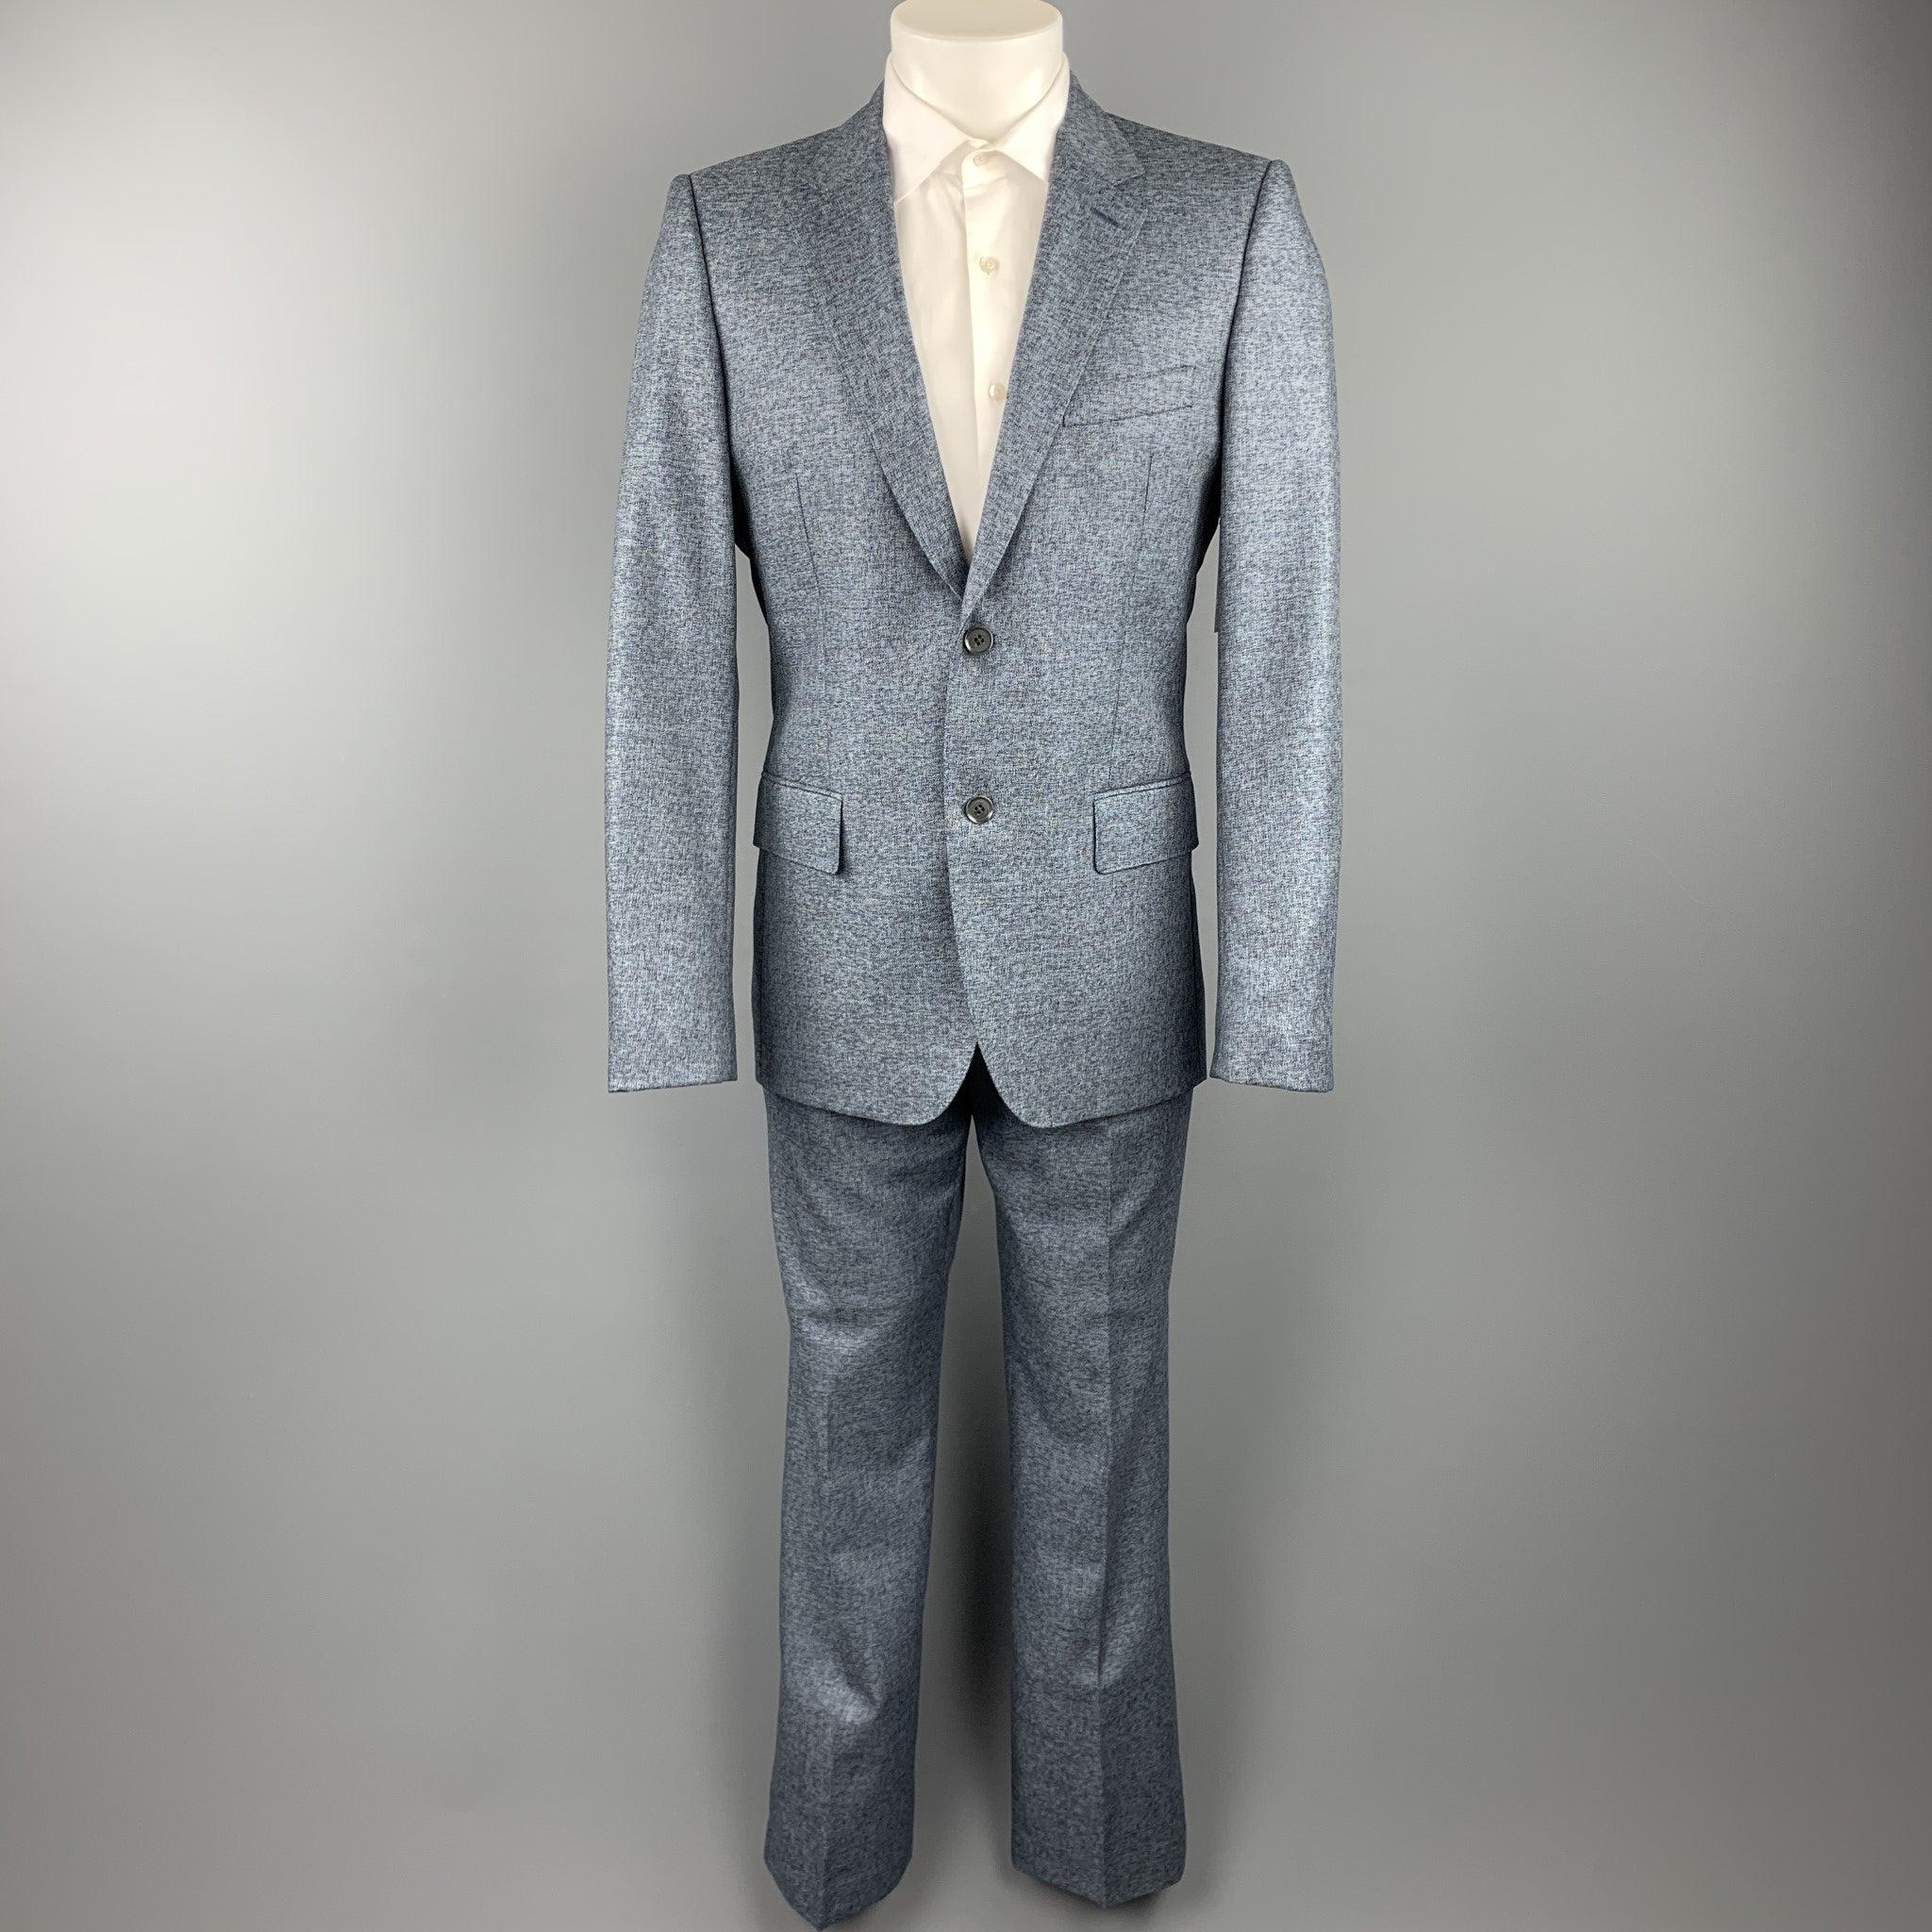 CALVIN KLEIN COLLECTION
suit comes in a blue heather wool with a teal liner and includes a single breasted, two button sport coat with a notch lapel and matching flat front trousers. As-Is. Minor wear on the liner.
Good Pre-Owned Condition.